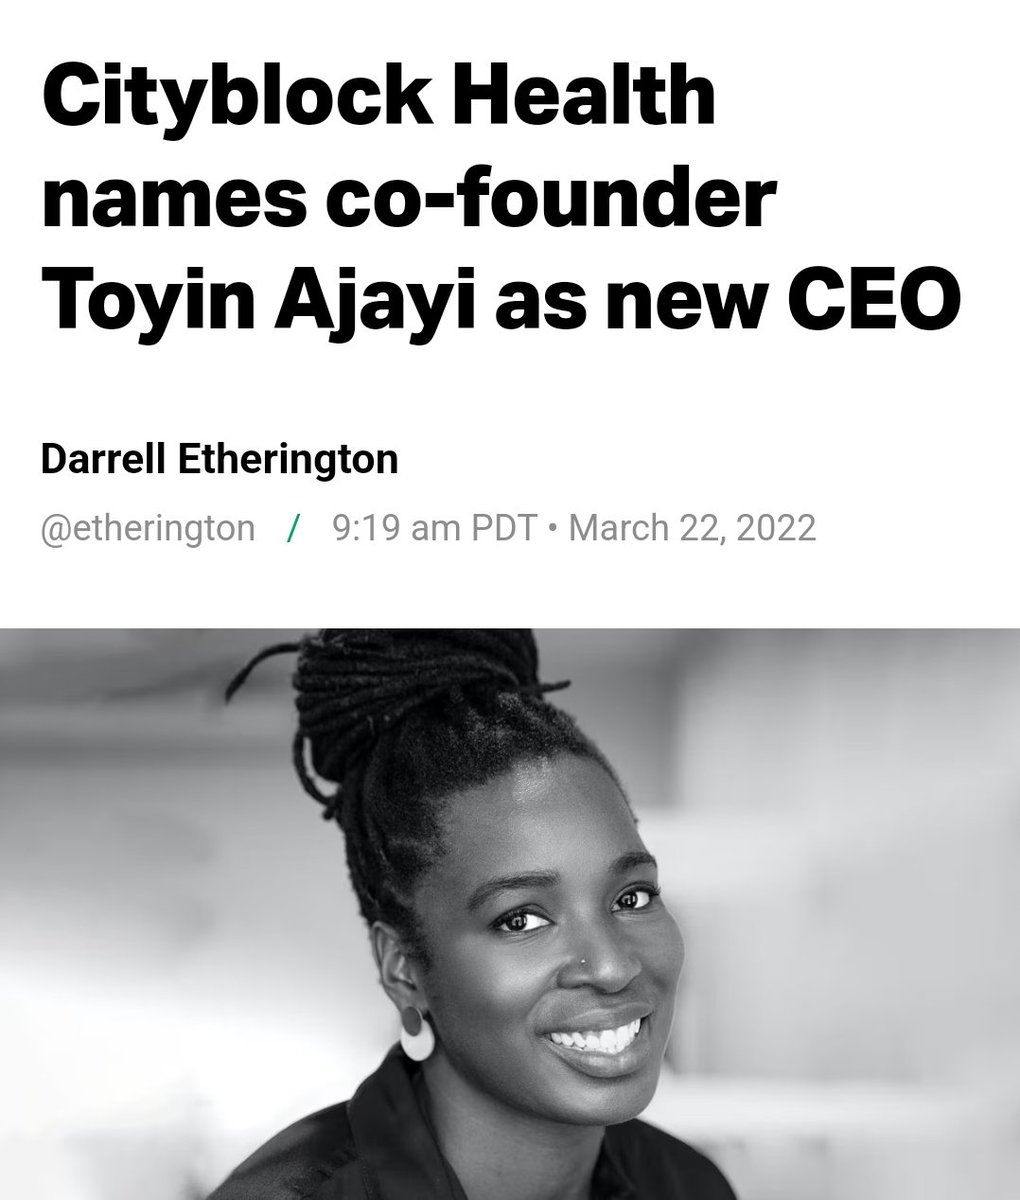 Primary healthcare provider Cityblock Health names co-founder Toyin Ajayi, a former physician as its new CEO. 

The company, which has raised nearly $900 million, with a valuation of $6 billion, focuses on delivering comprehensive, quality care to the underserved population.👇